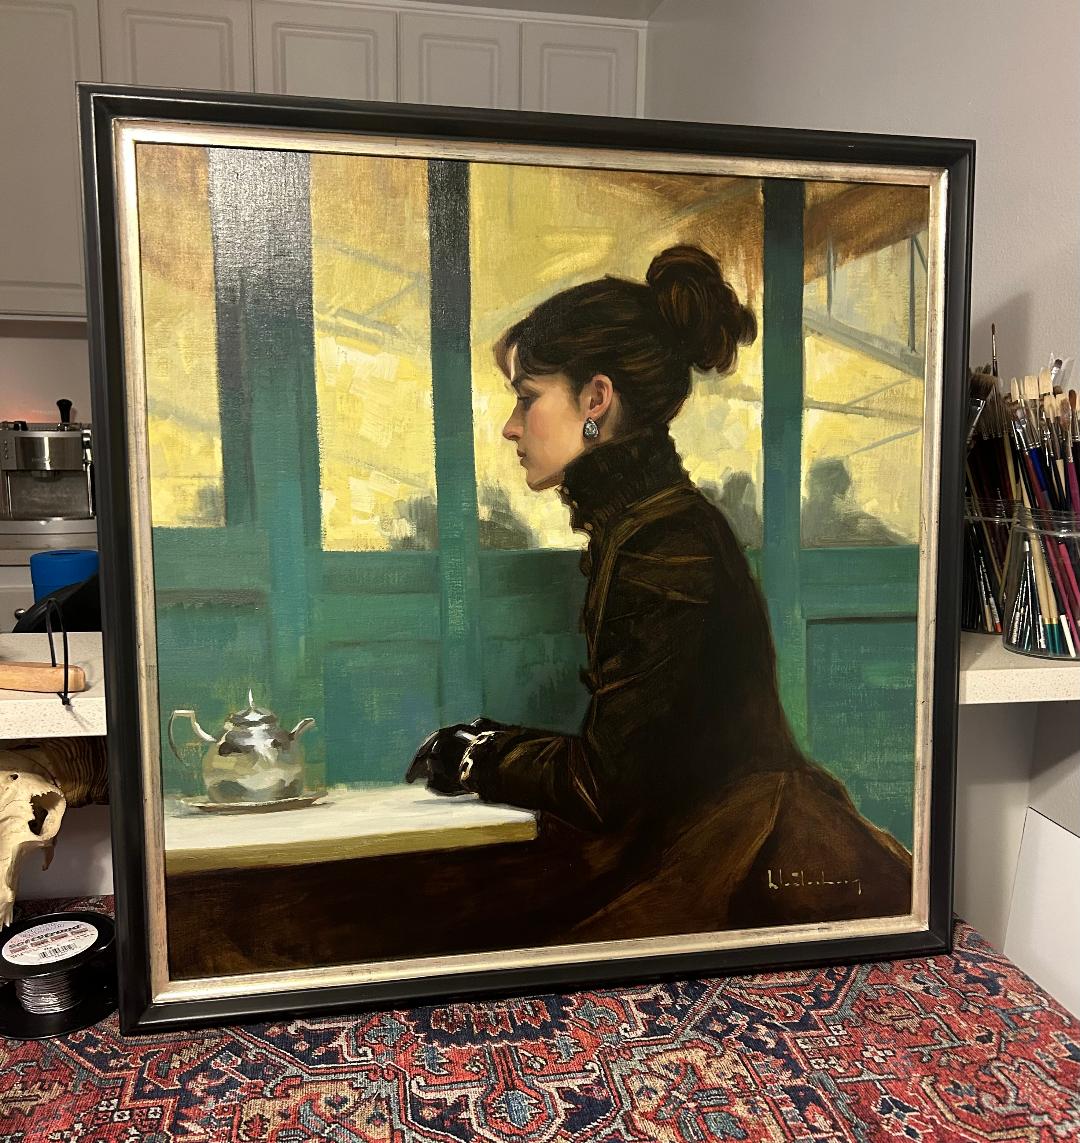 A Cafe in Town by Aaron Westerberg at LePrince Galleries